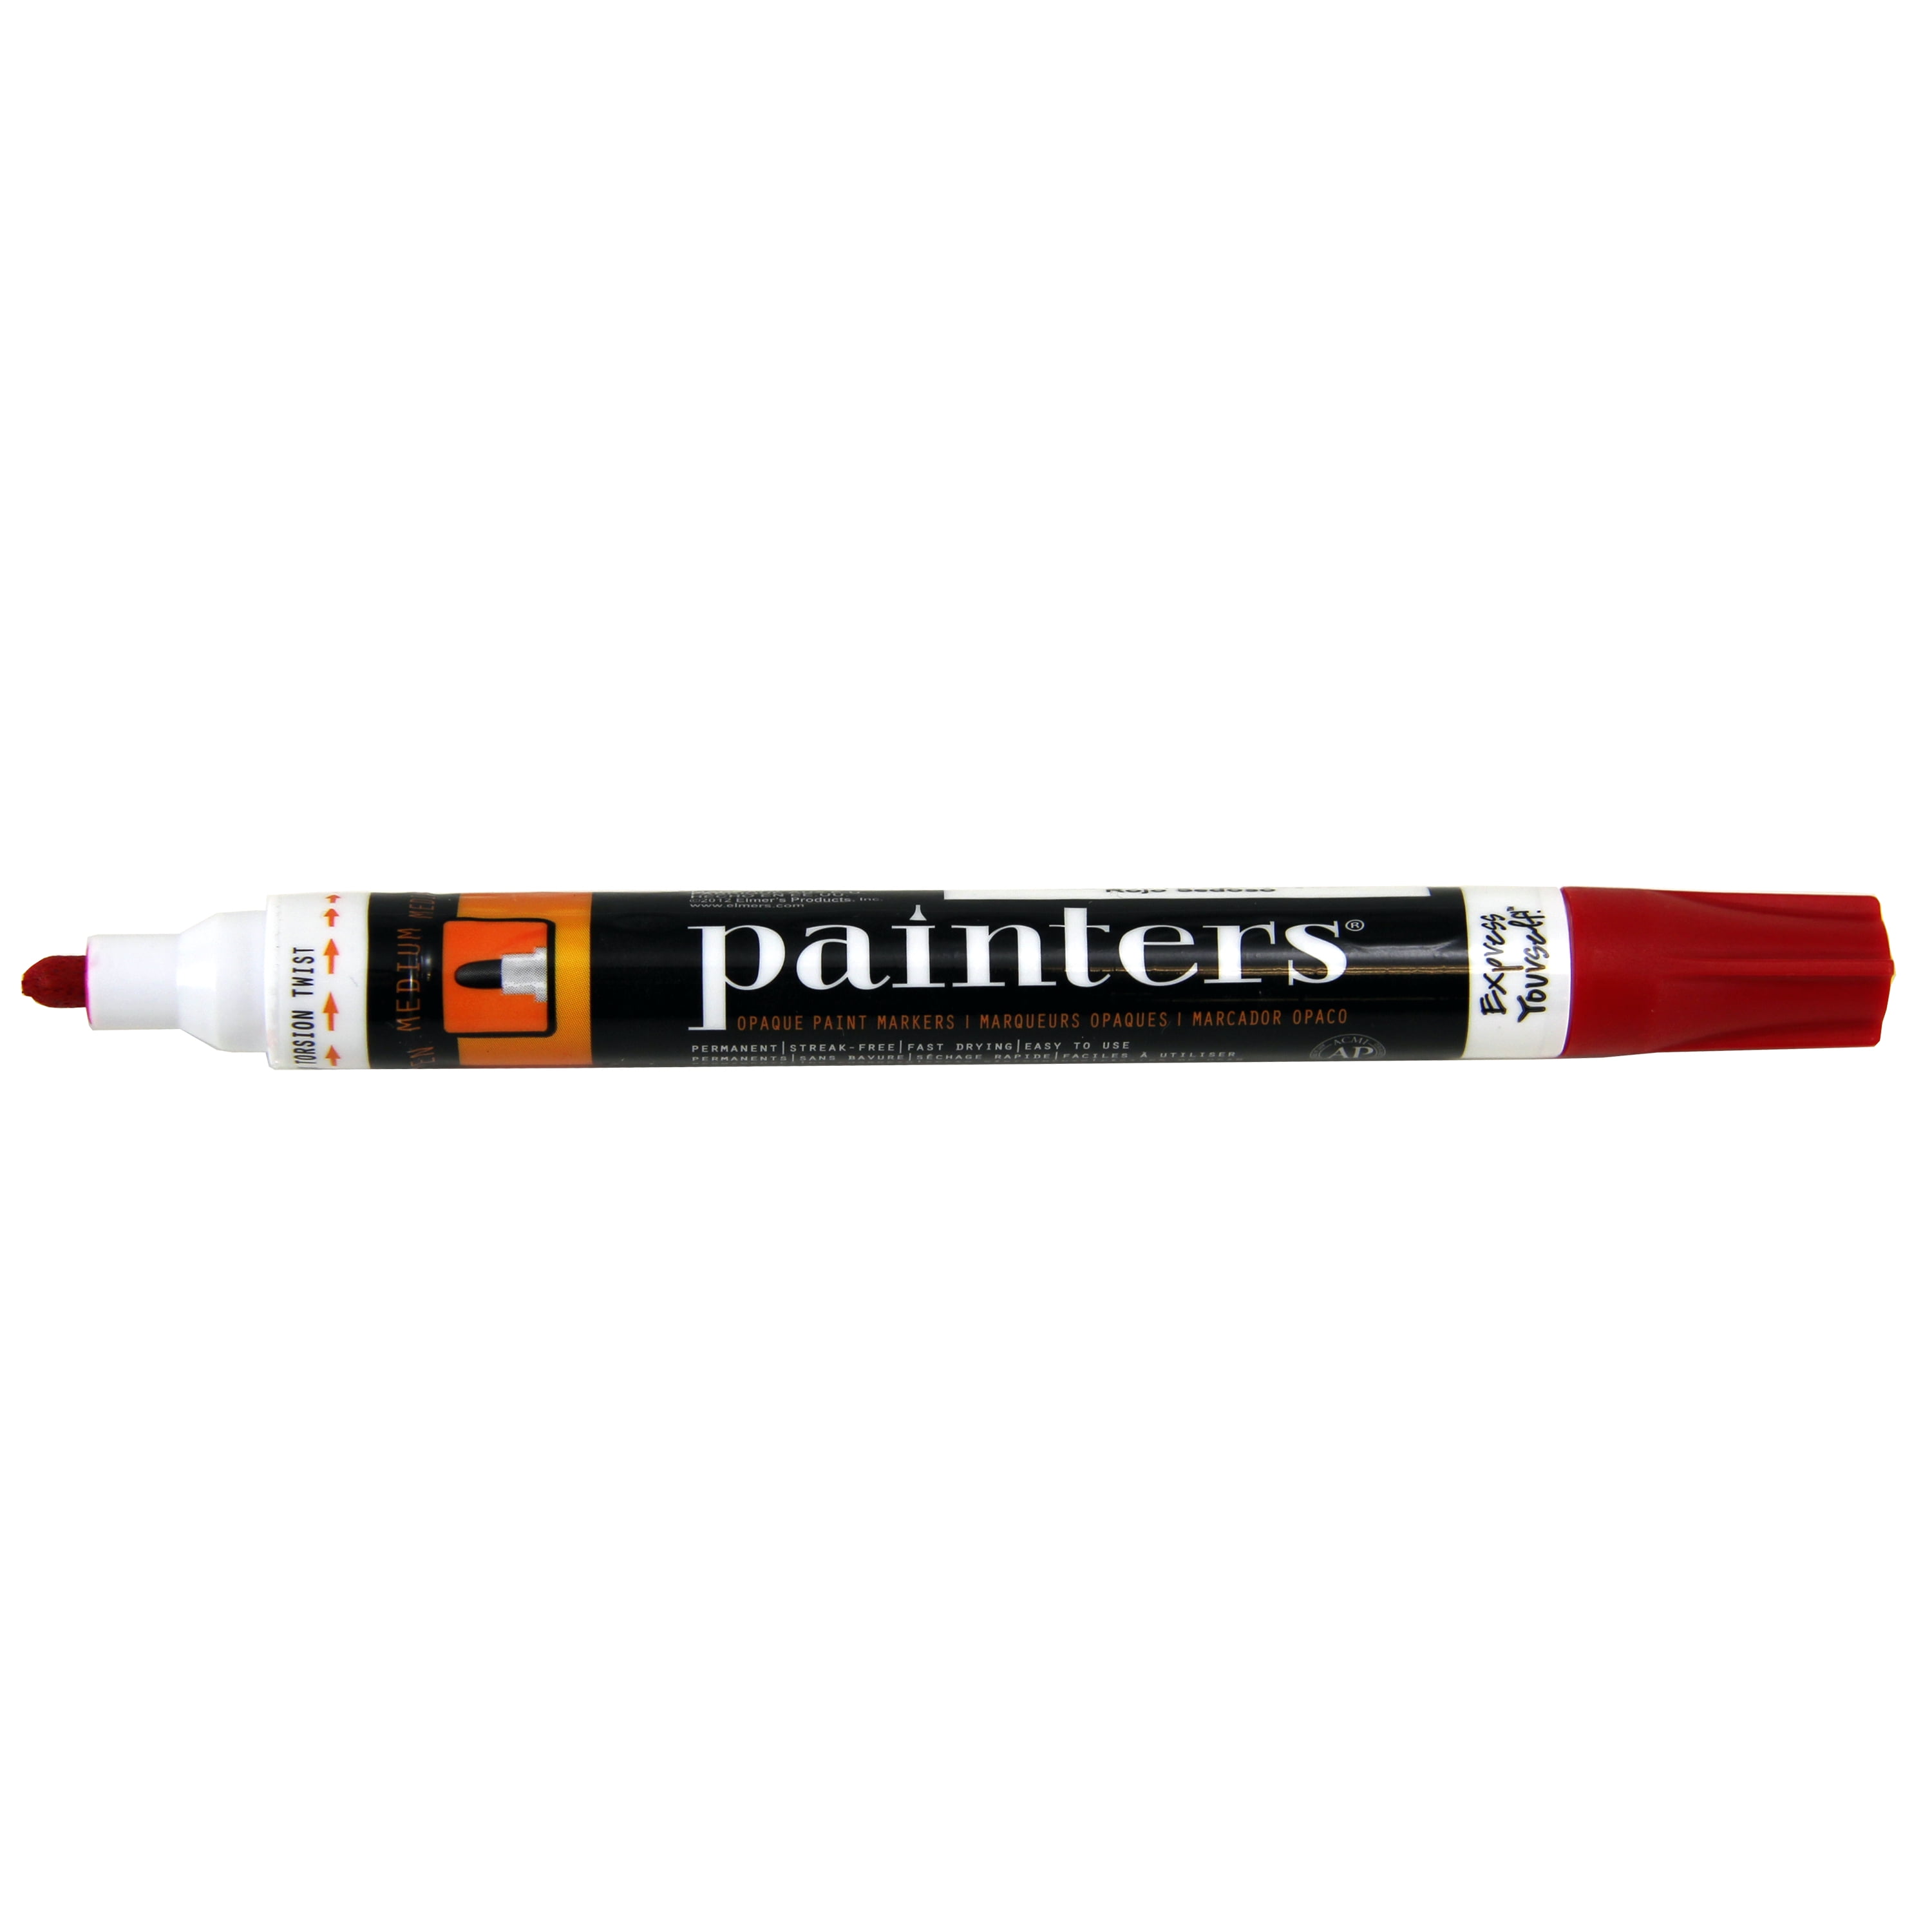 Paint Markers - Medium Point, 6 Pack, Red Ink, NSN 7520-01-588-9100 - The  ArmyProperty Store